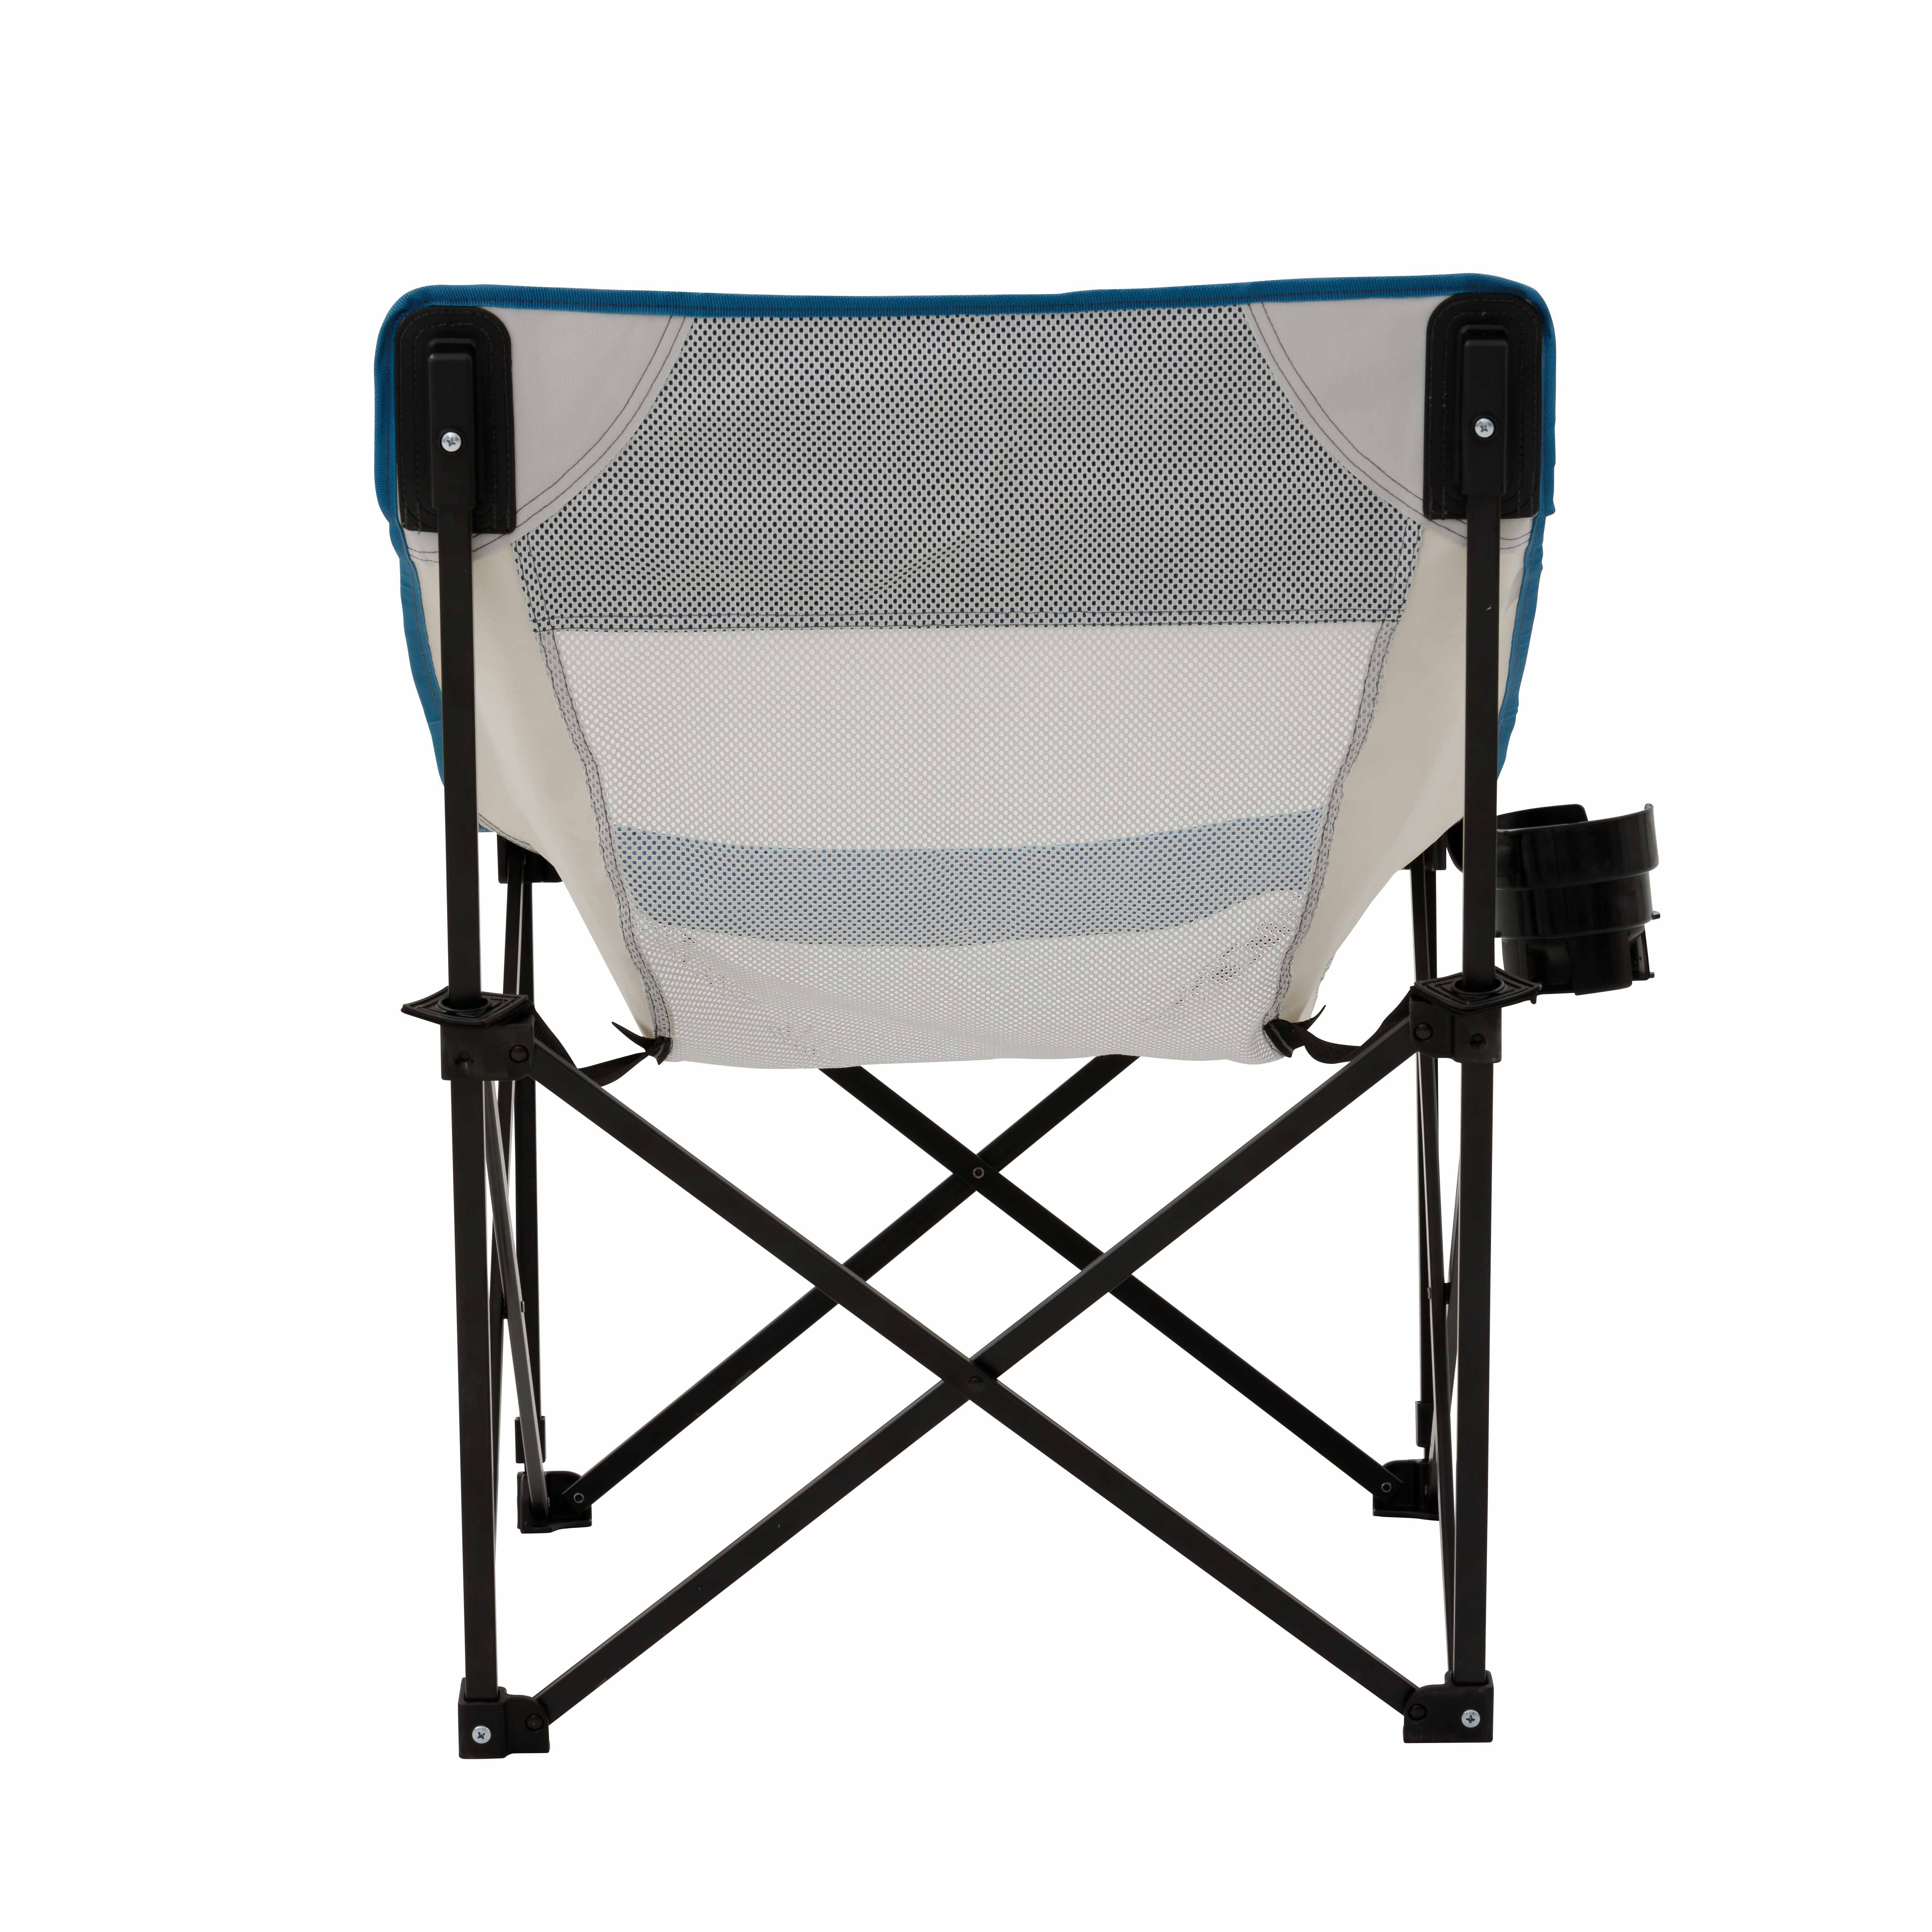 Ozark Trail 4 Piece, Tent, Chair and Table Camping Combo - image 11 of 15